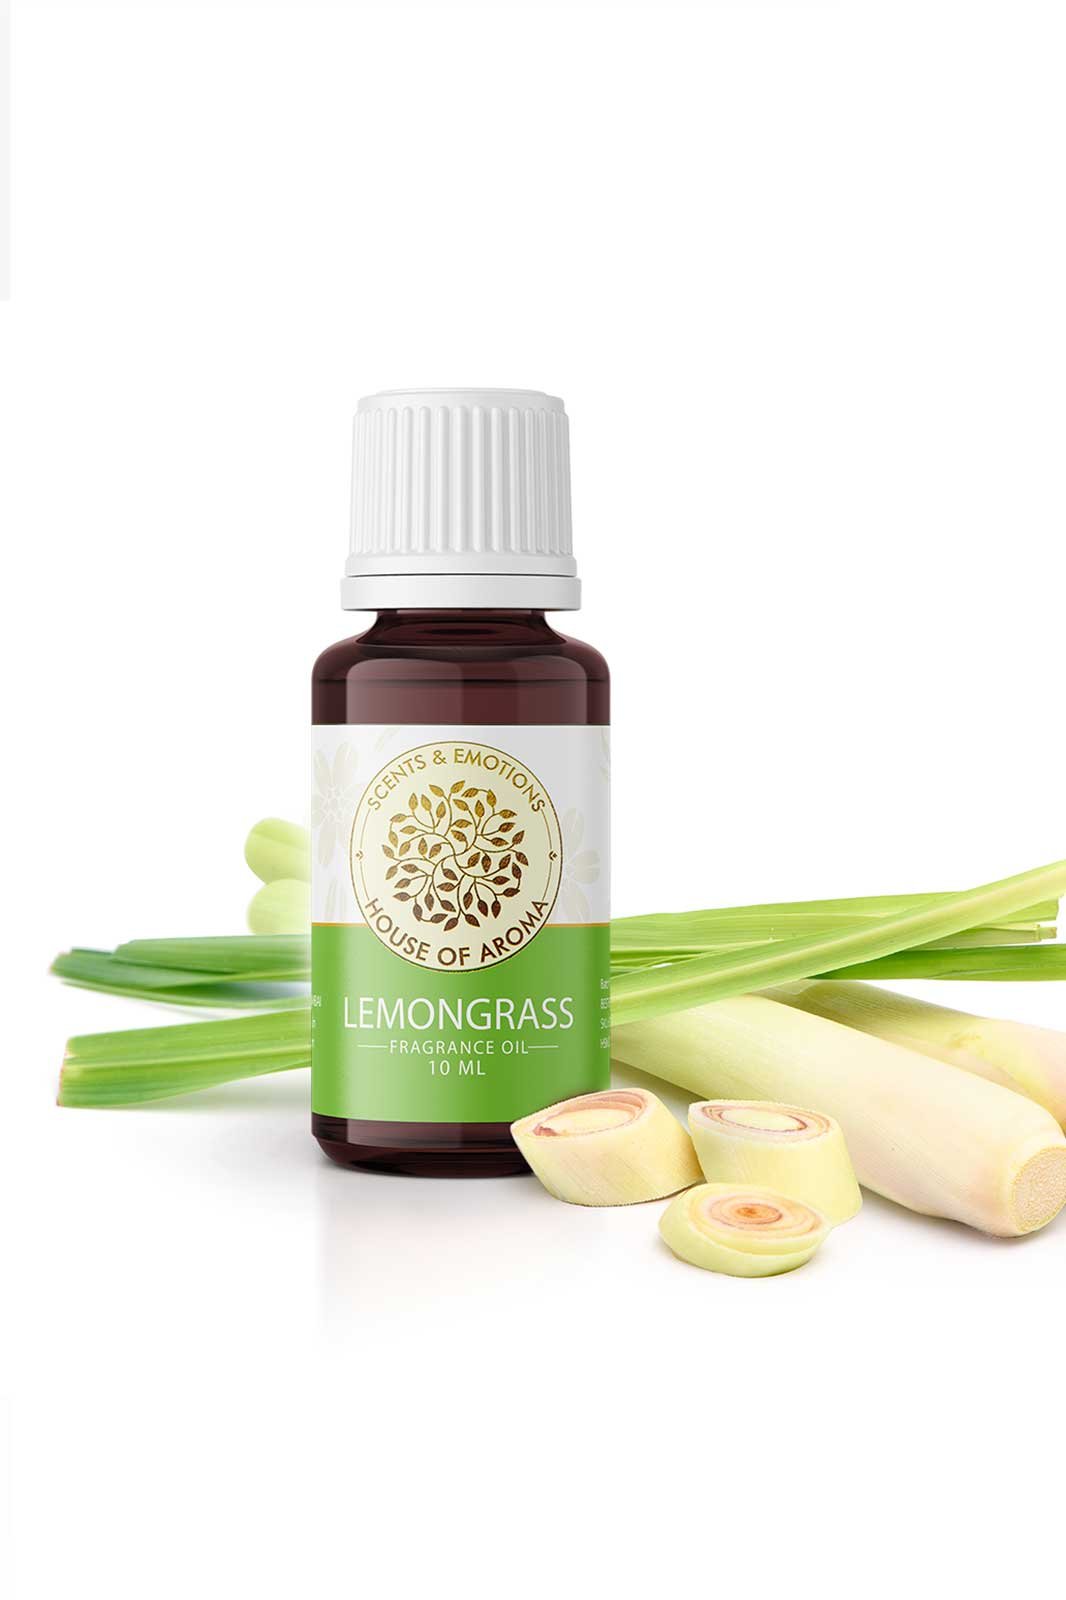 Fragrance Oil, Aroma oil, Synthetic oils, Fragrance oil for candles, oil for diffusers, Aromatic oil, Candle oil, Aromatherapy oil, oil manufacturers, House of Aroma, Lemongrass Fragrance Oil, lemongrass aroma oil, aromatic lemongrass oil,lemon grass fragrance, aroma lemongrass oil, lemongrass fragrance spray, lemongrass aroma oil, lemongrass scented oil